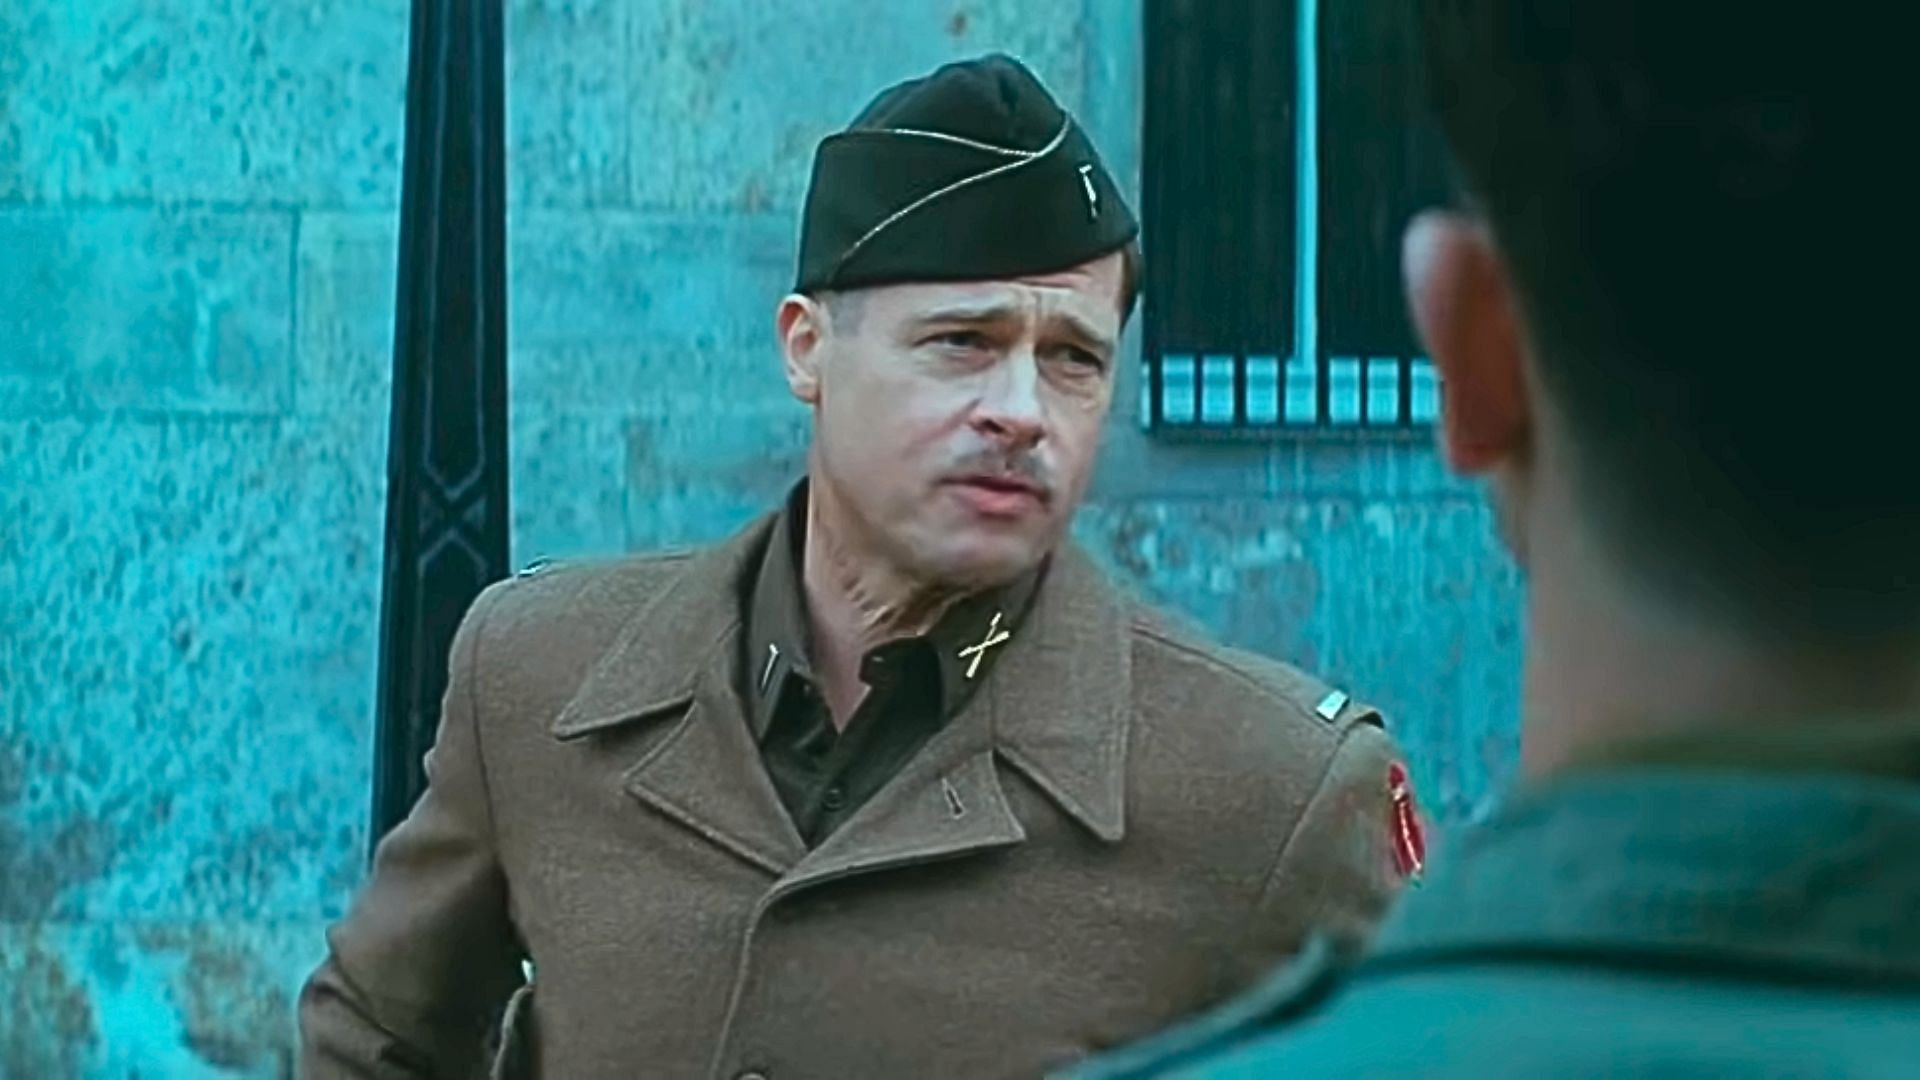 Brad Pitt in Inglourious Basterds (Image via YouTube/Rotten Tomatoes Classic Trailers)